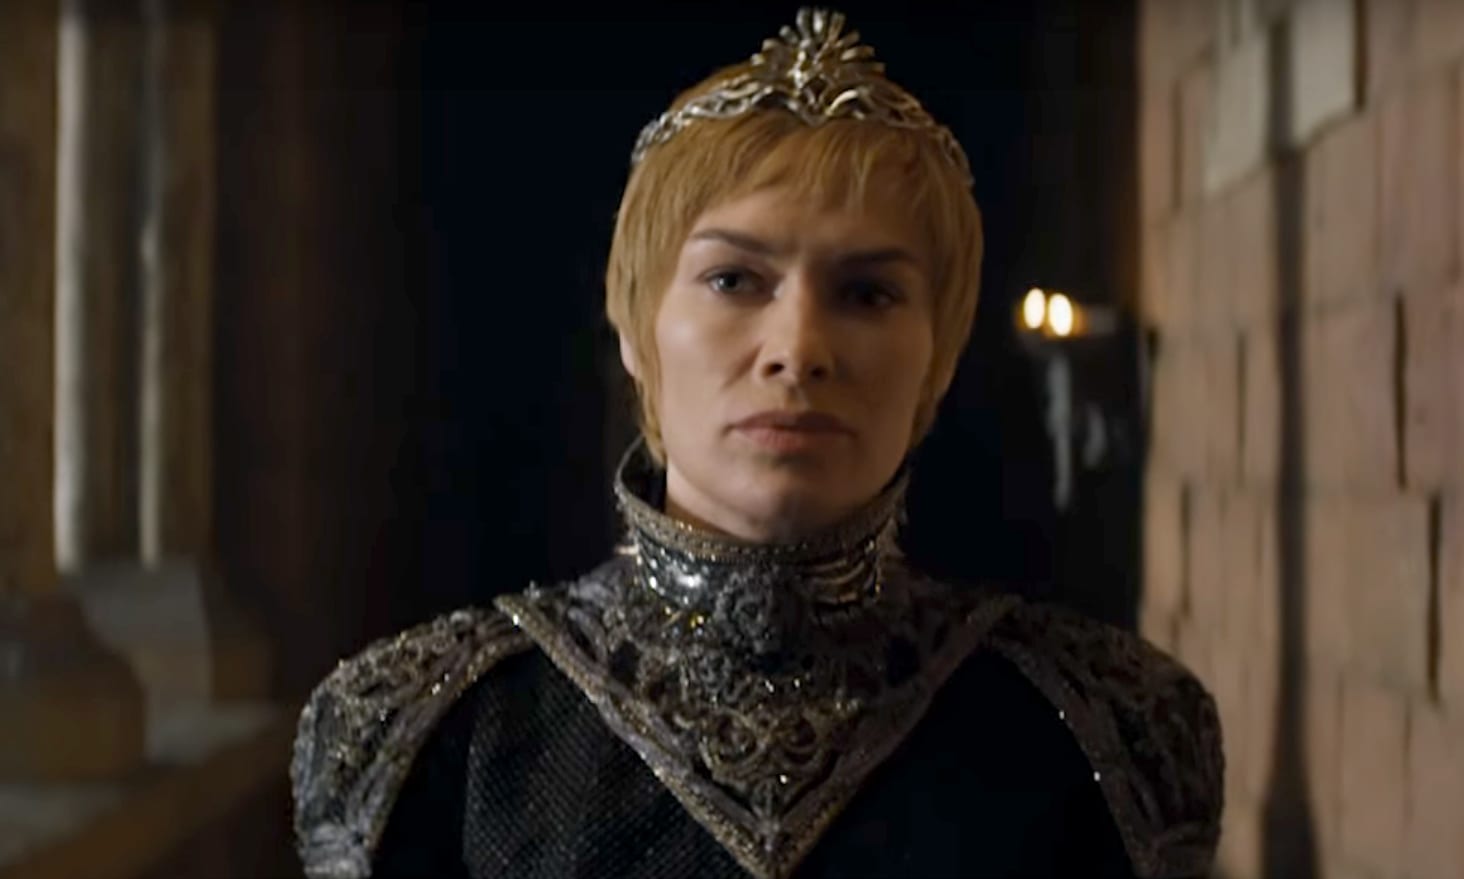 New 'Game of Thrones' Season 7 Trailer Released Titled "Long Walk"